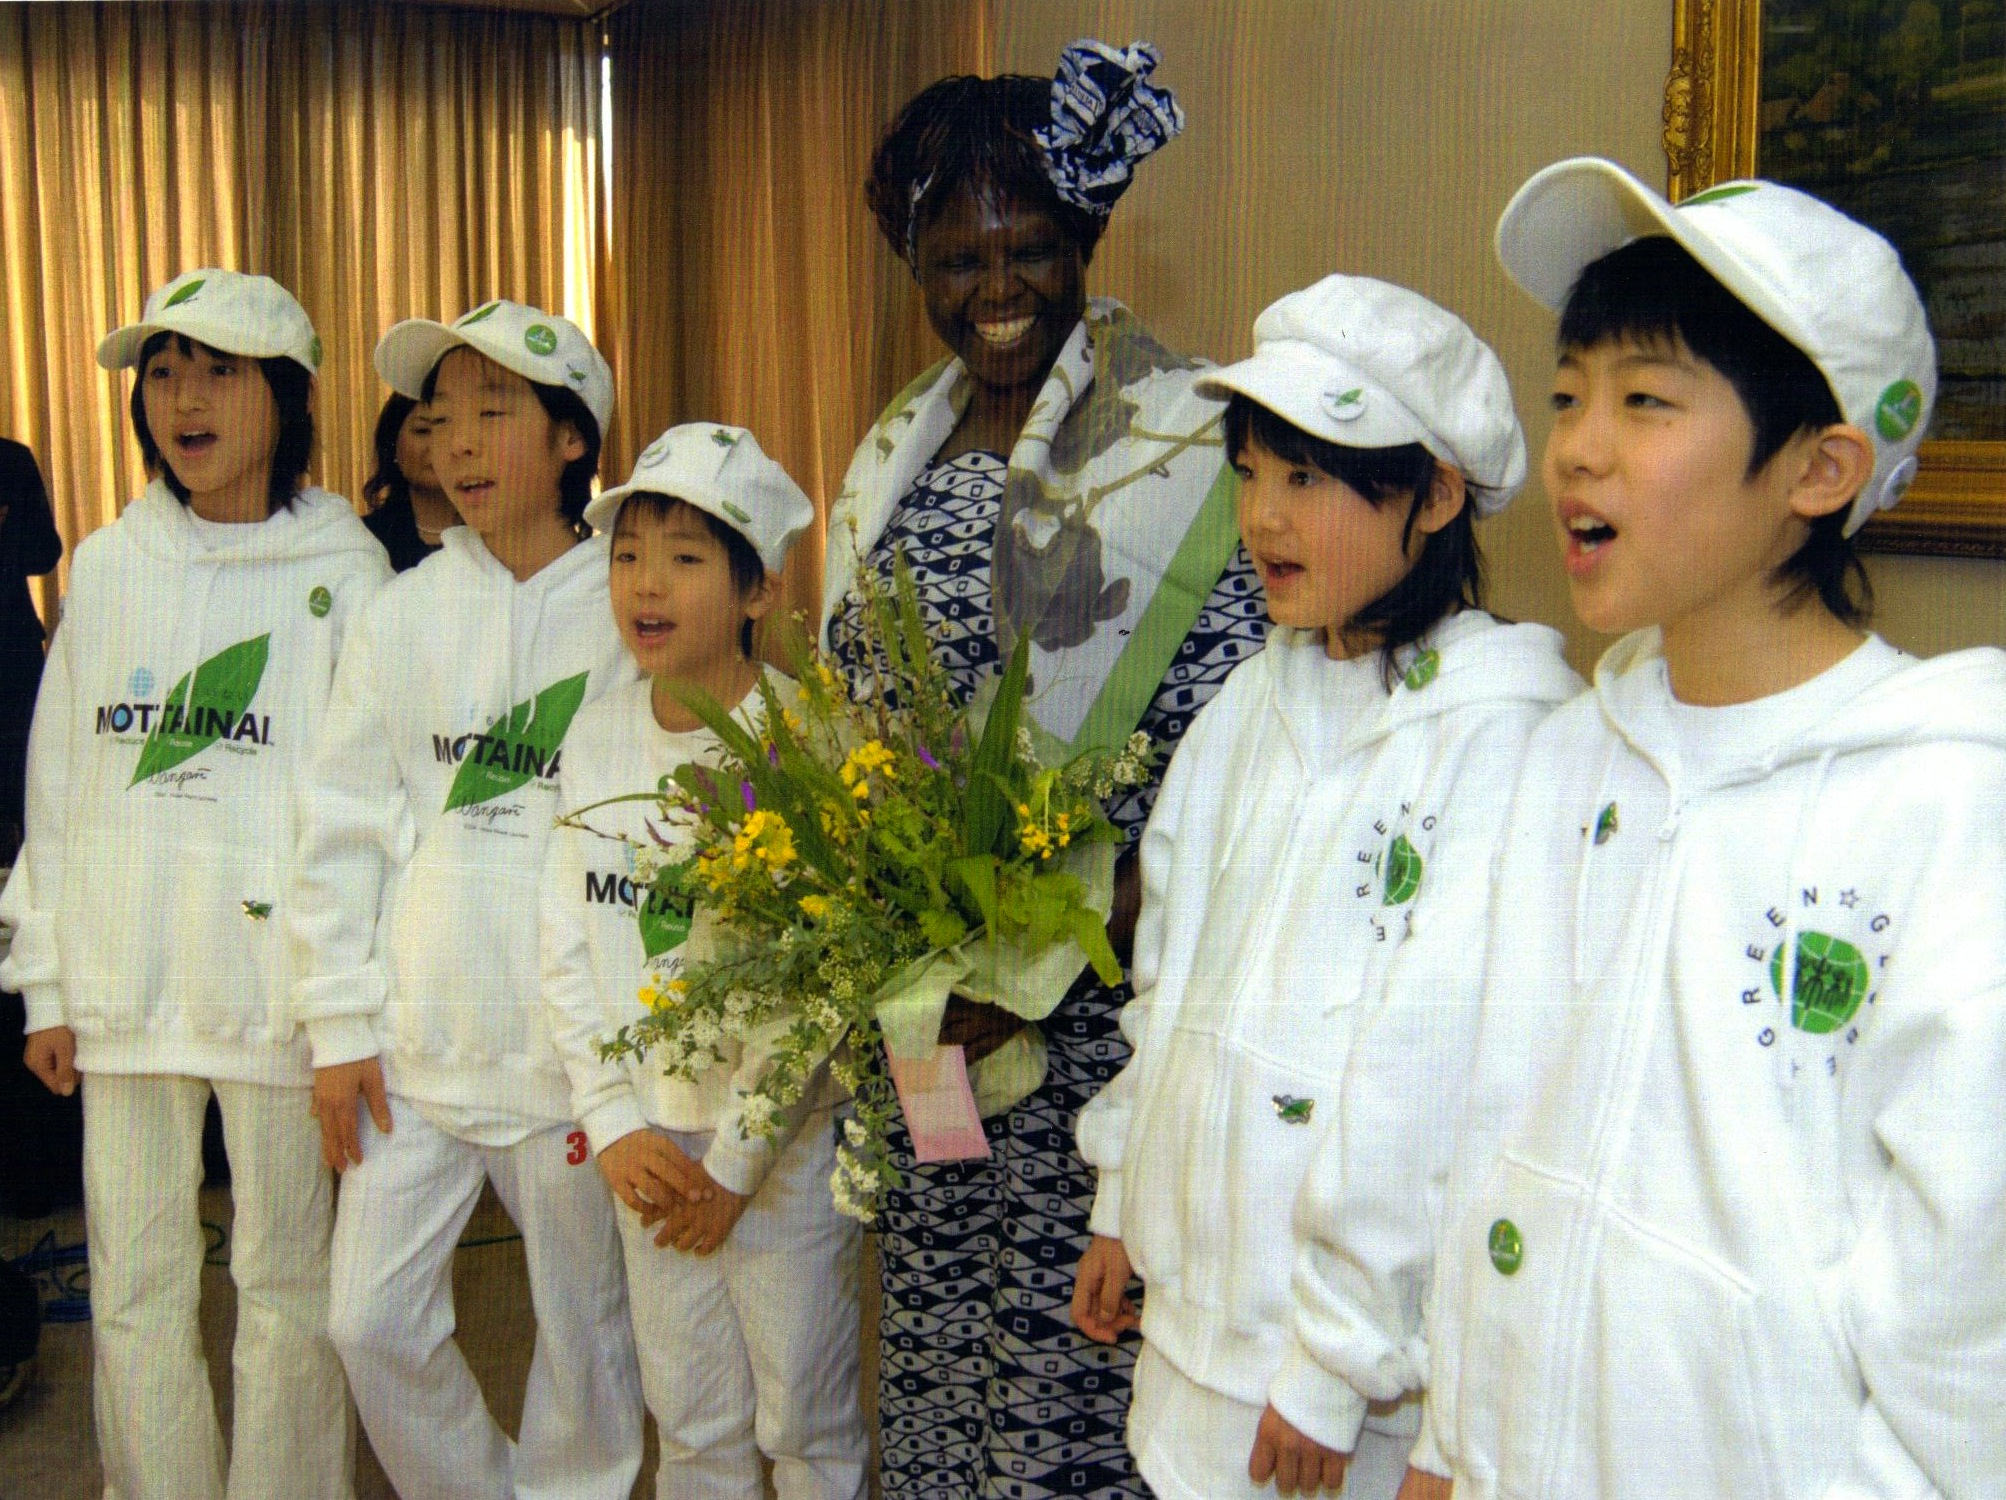 Professor Maathai with students during her visit to Japan